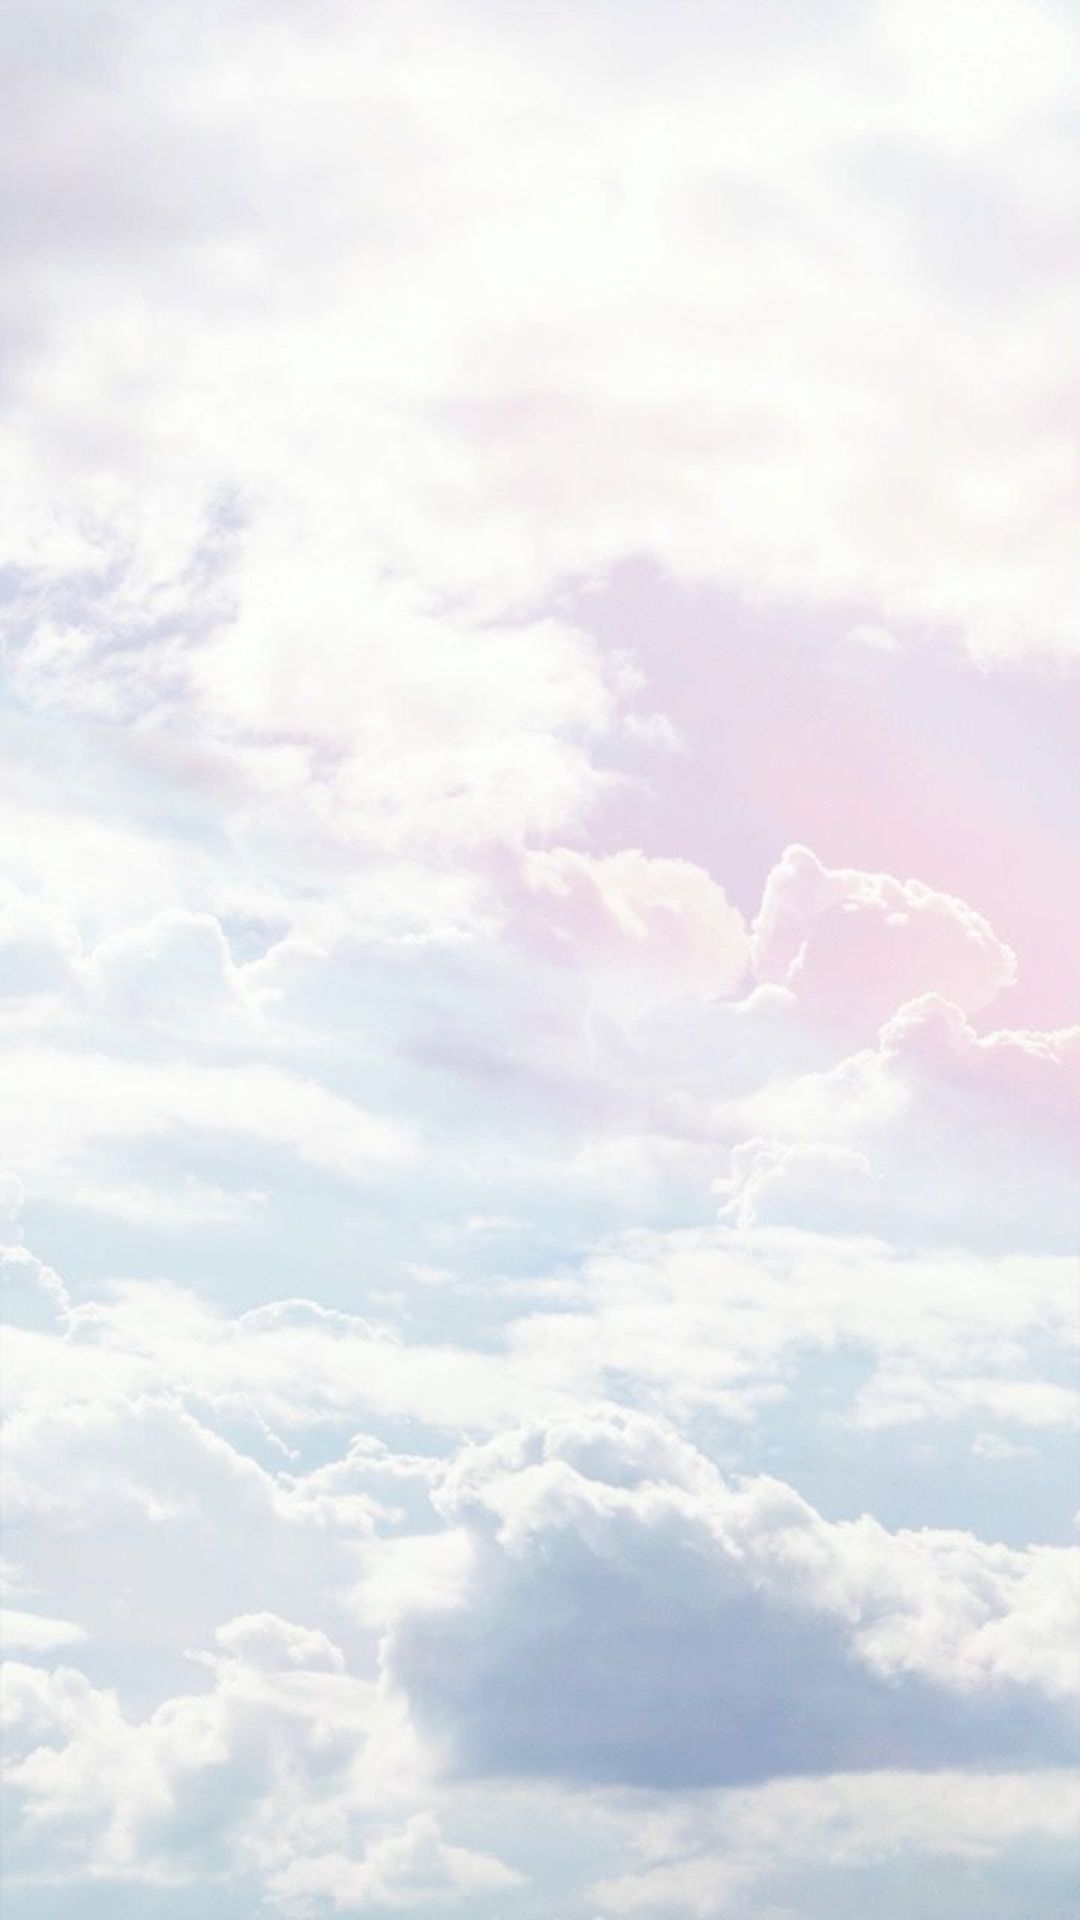 Clouds Aesthetic, iPhone, Desktop HD Background / Wallpaper (1080p, 4k) #hdwallpaper #androidwallpaper #iphonewallpa. 水彩画の背景, 美しい壁紙, 空イラスト